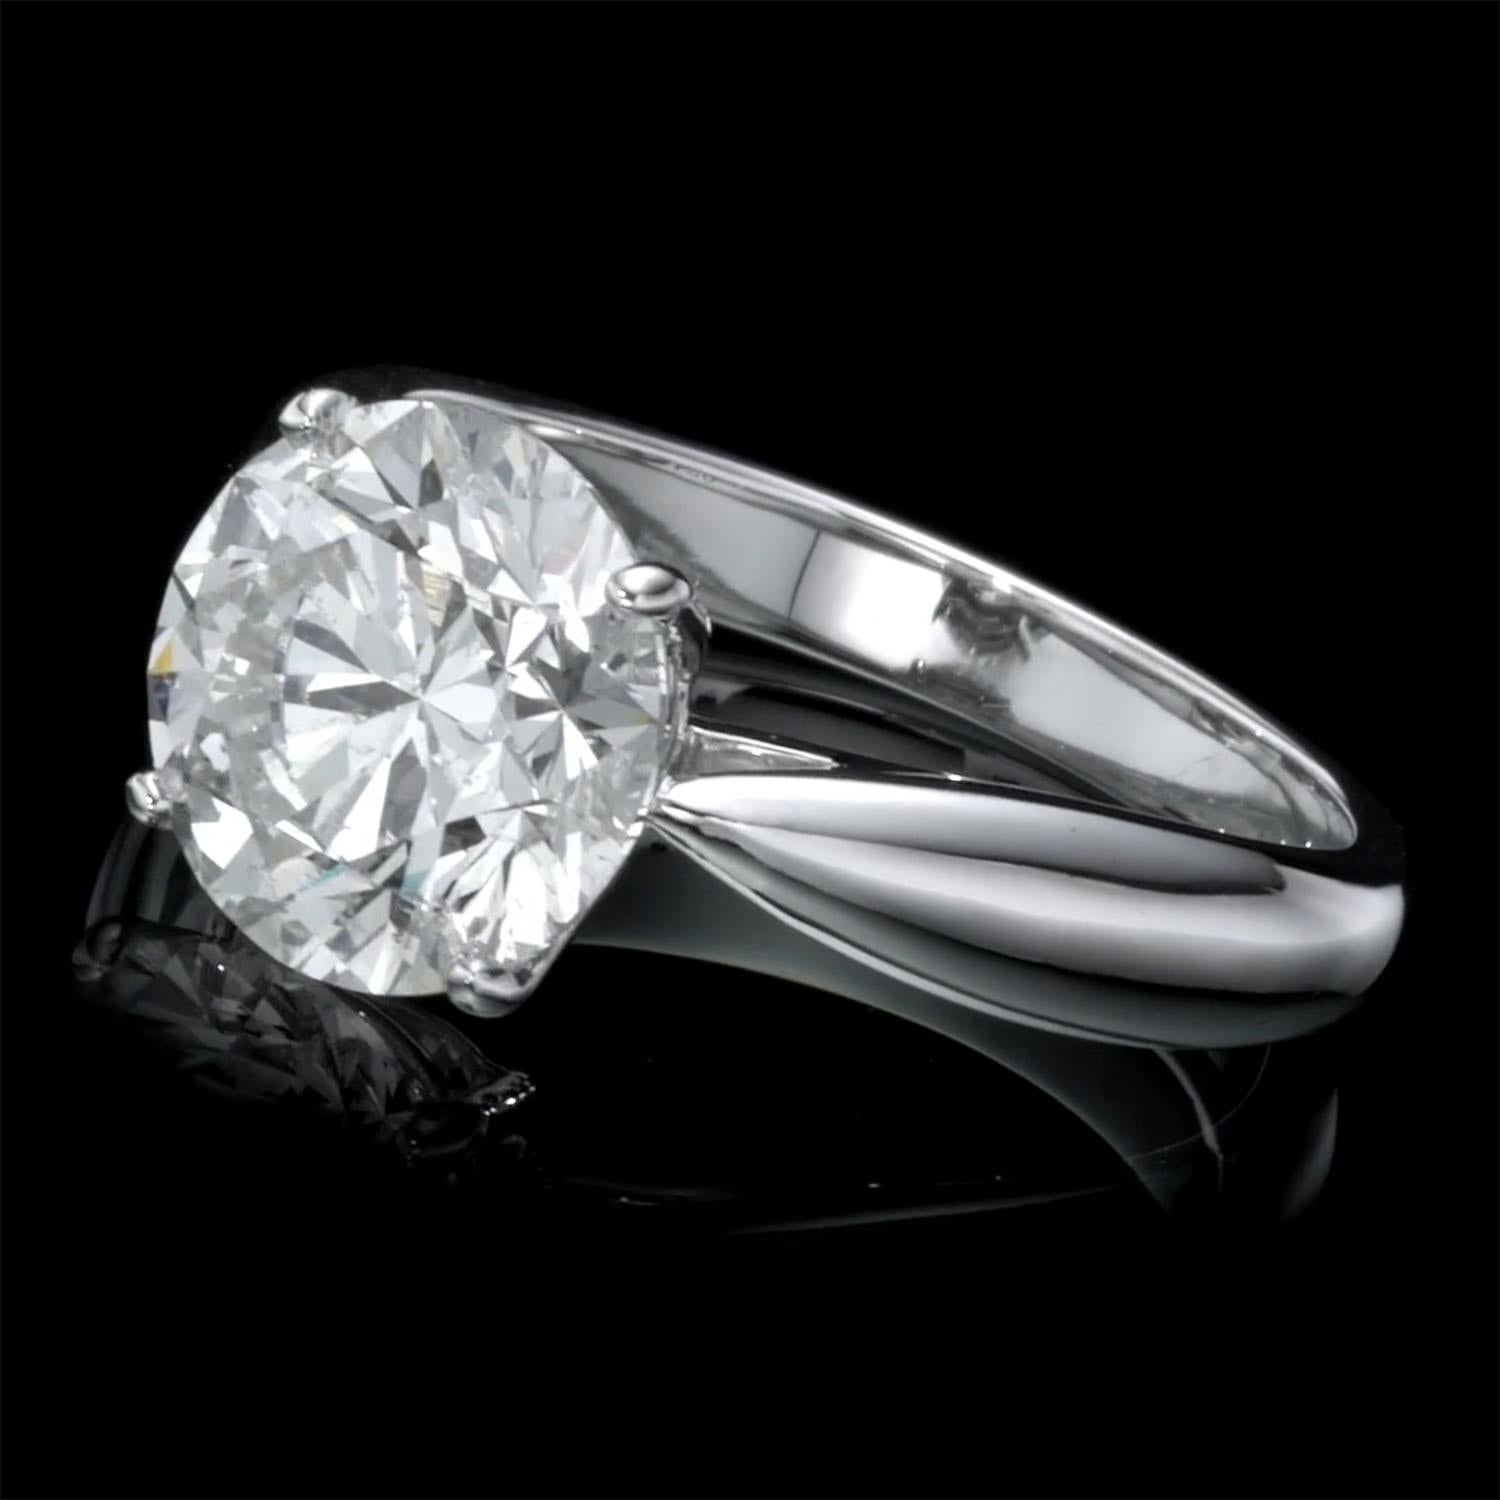 Women's 3.58 carat natural diamond engagement ring For Sale